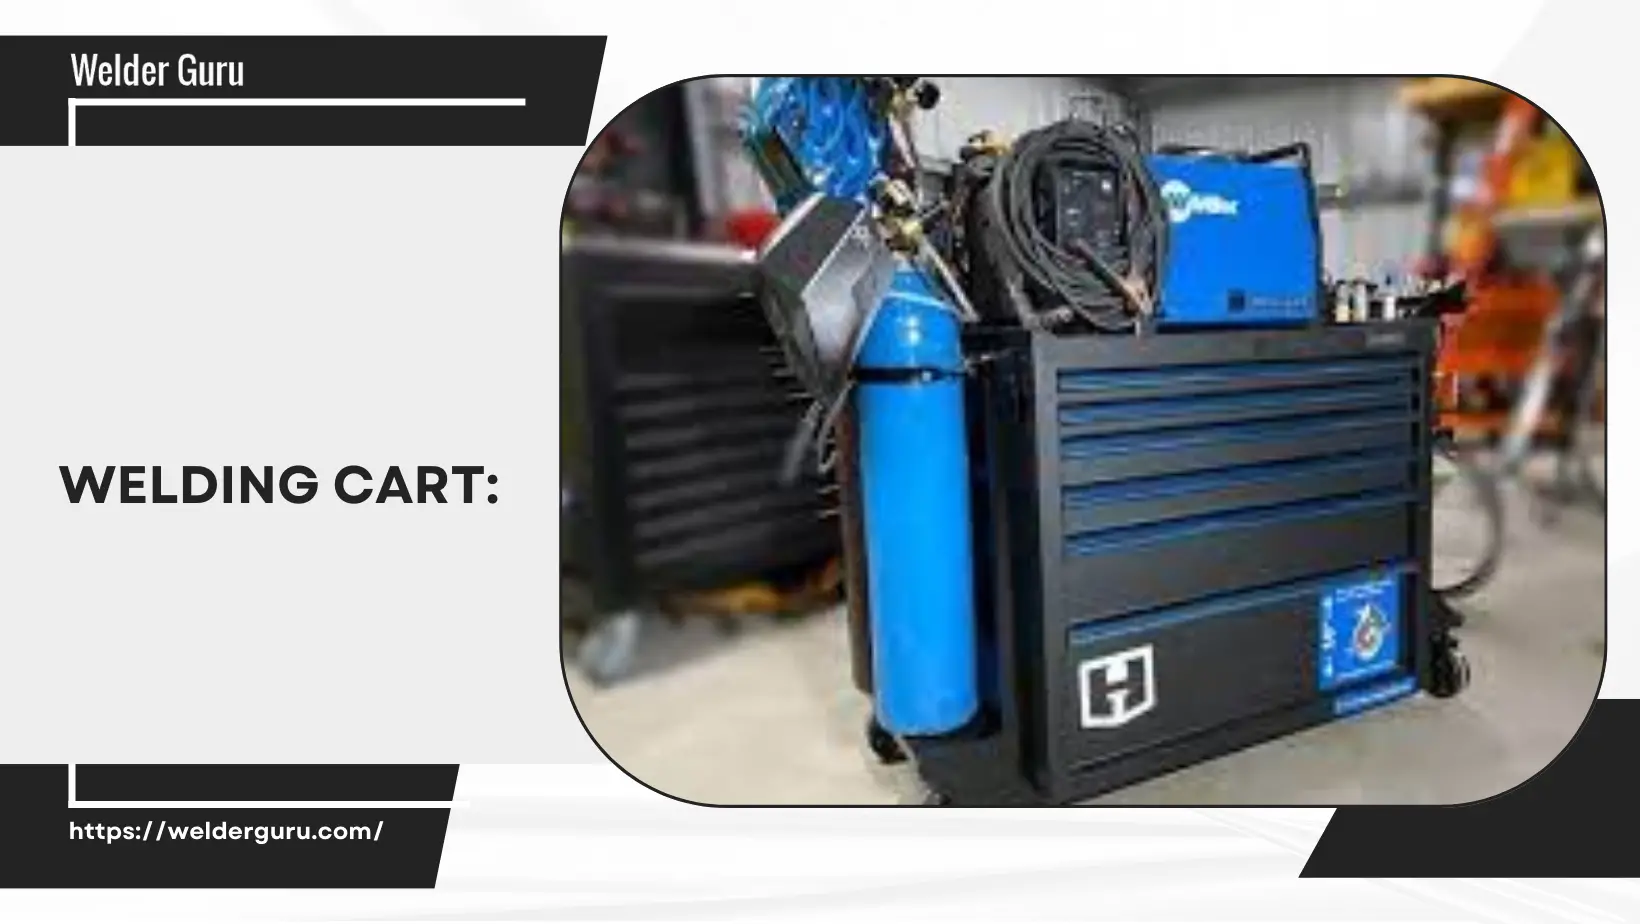 Why are welding carts angled?